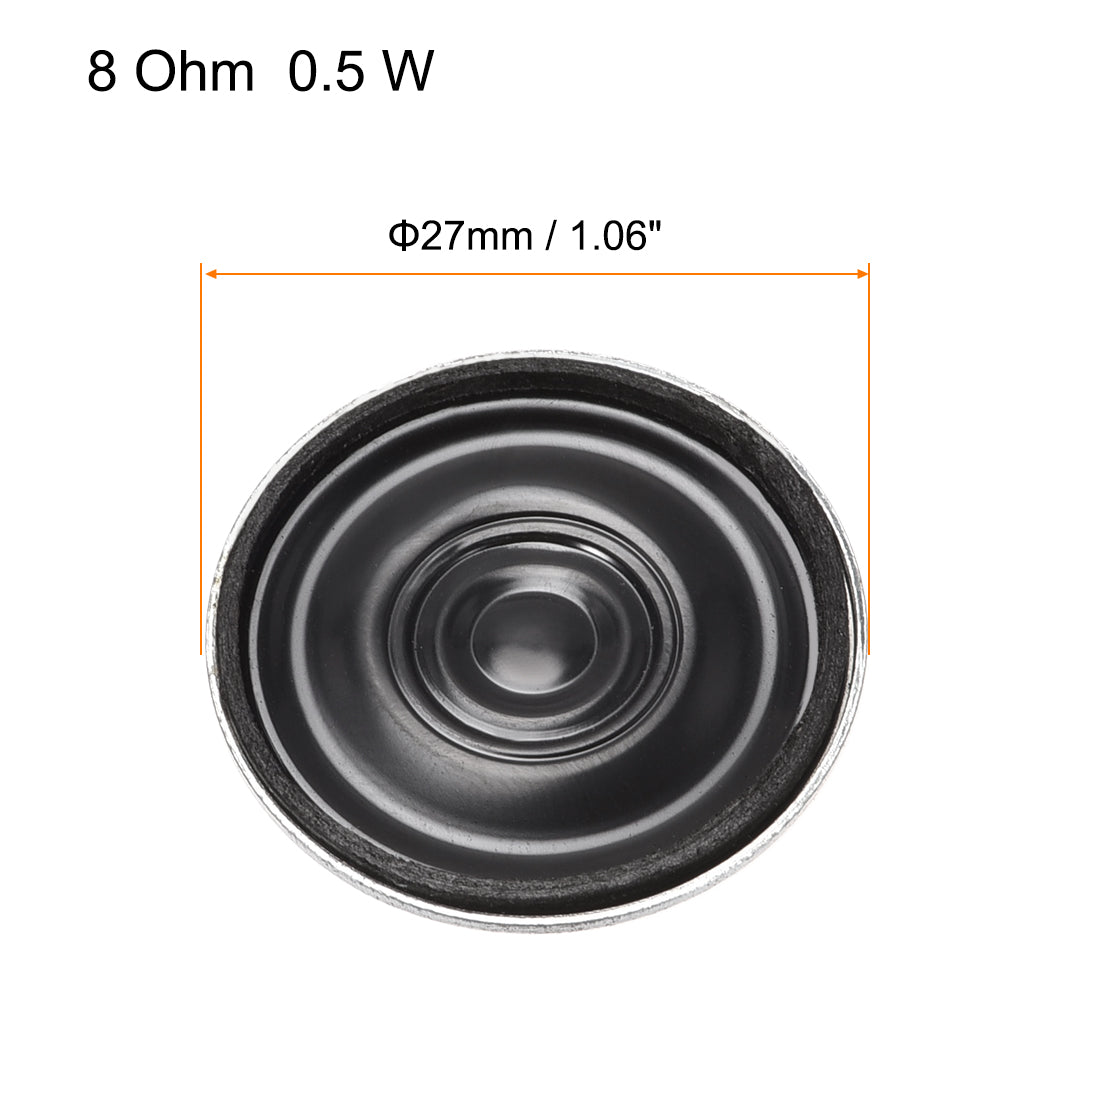 uxcell Uxcell 0.5W 8 Ohm DIY Magnetic Speaker 27mm Round Shape Replacement Loudspeaker for Building Intercom 4pcs